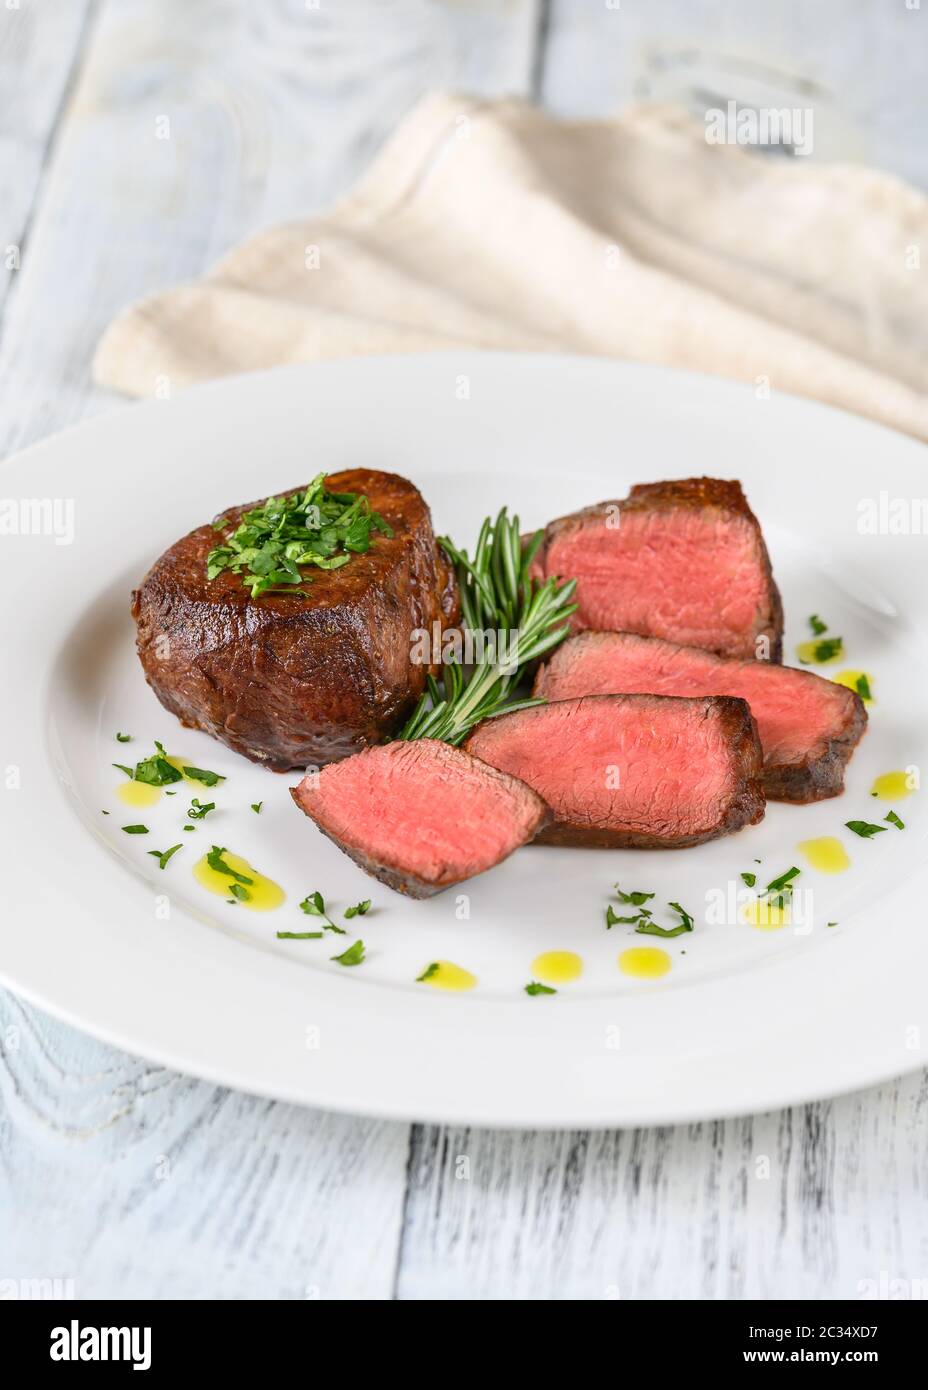 Filet mignon with frsh rosemary on the plate Stock Photo